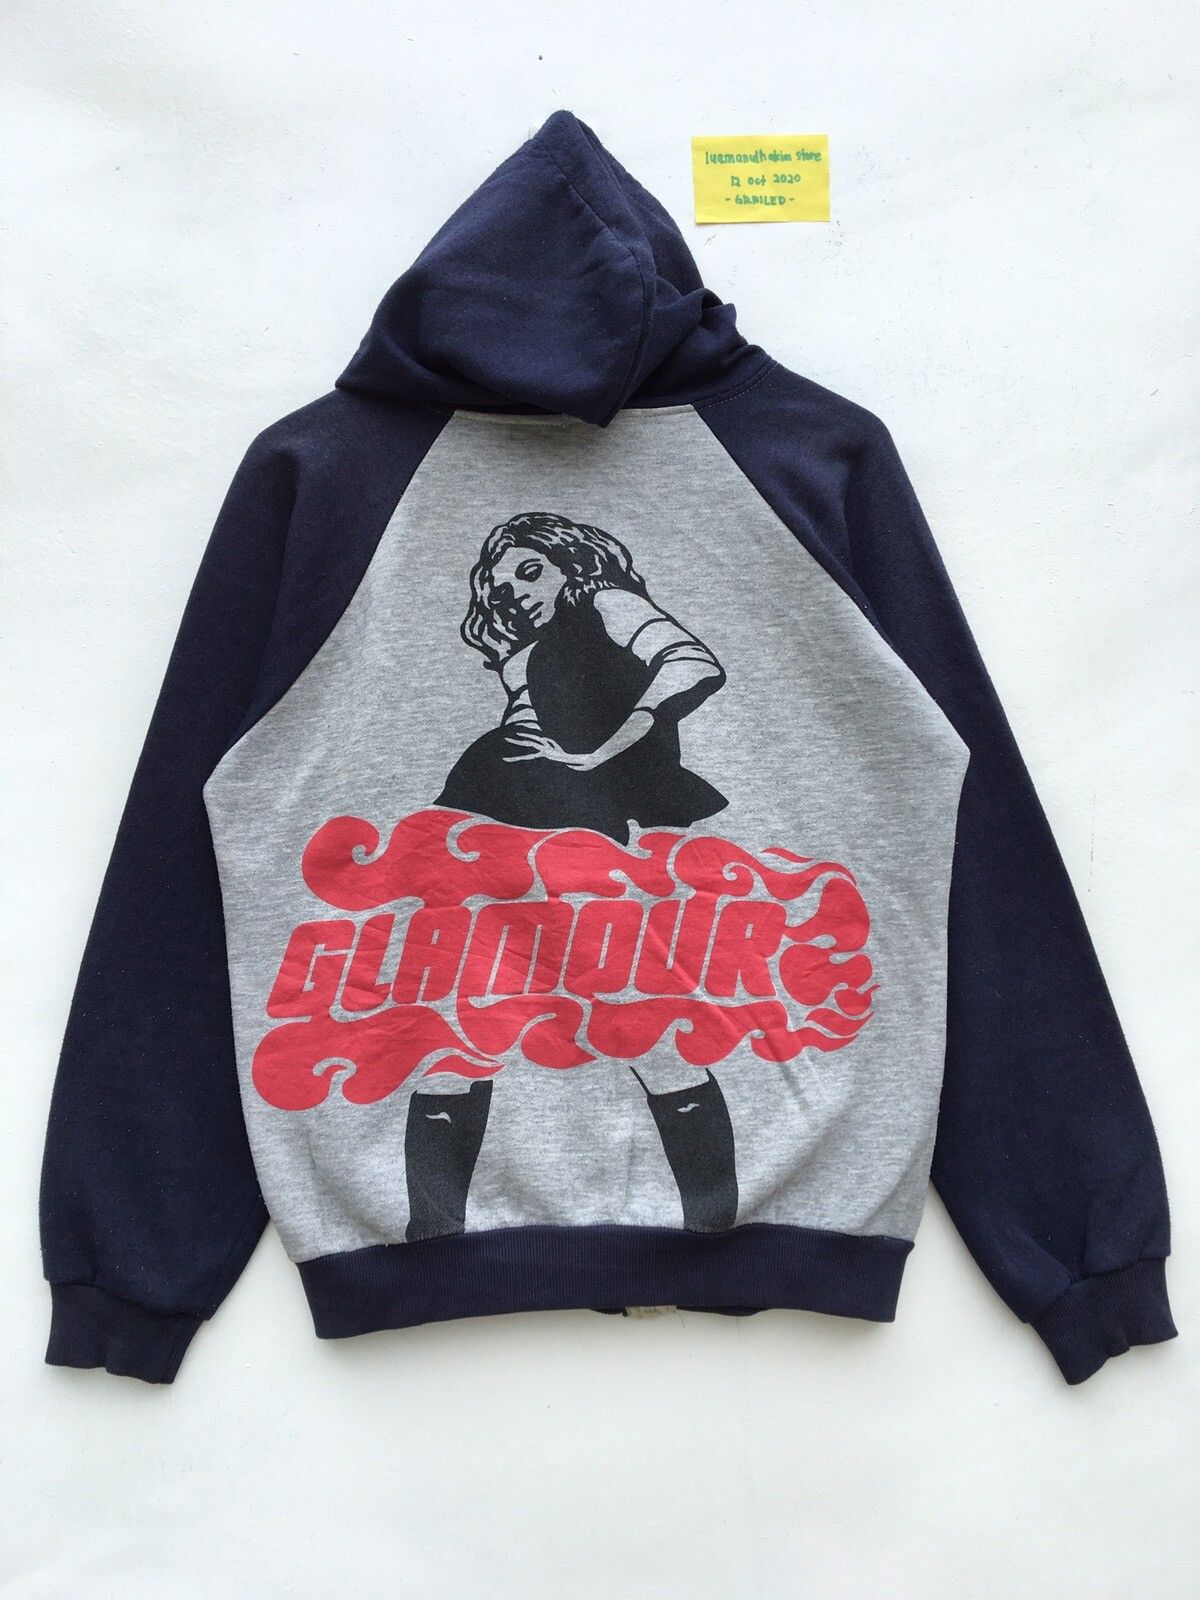 Hysteric Glamour Rare Vtg Hysteric Glamour Big Logo Zipper Hoodie Size US S / EU 44-46 / 1 - 1 Preview